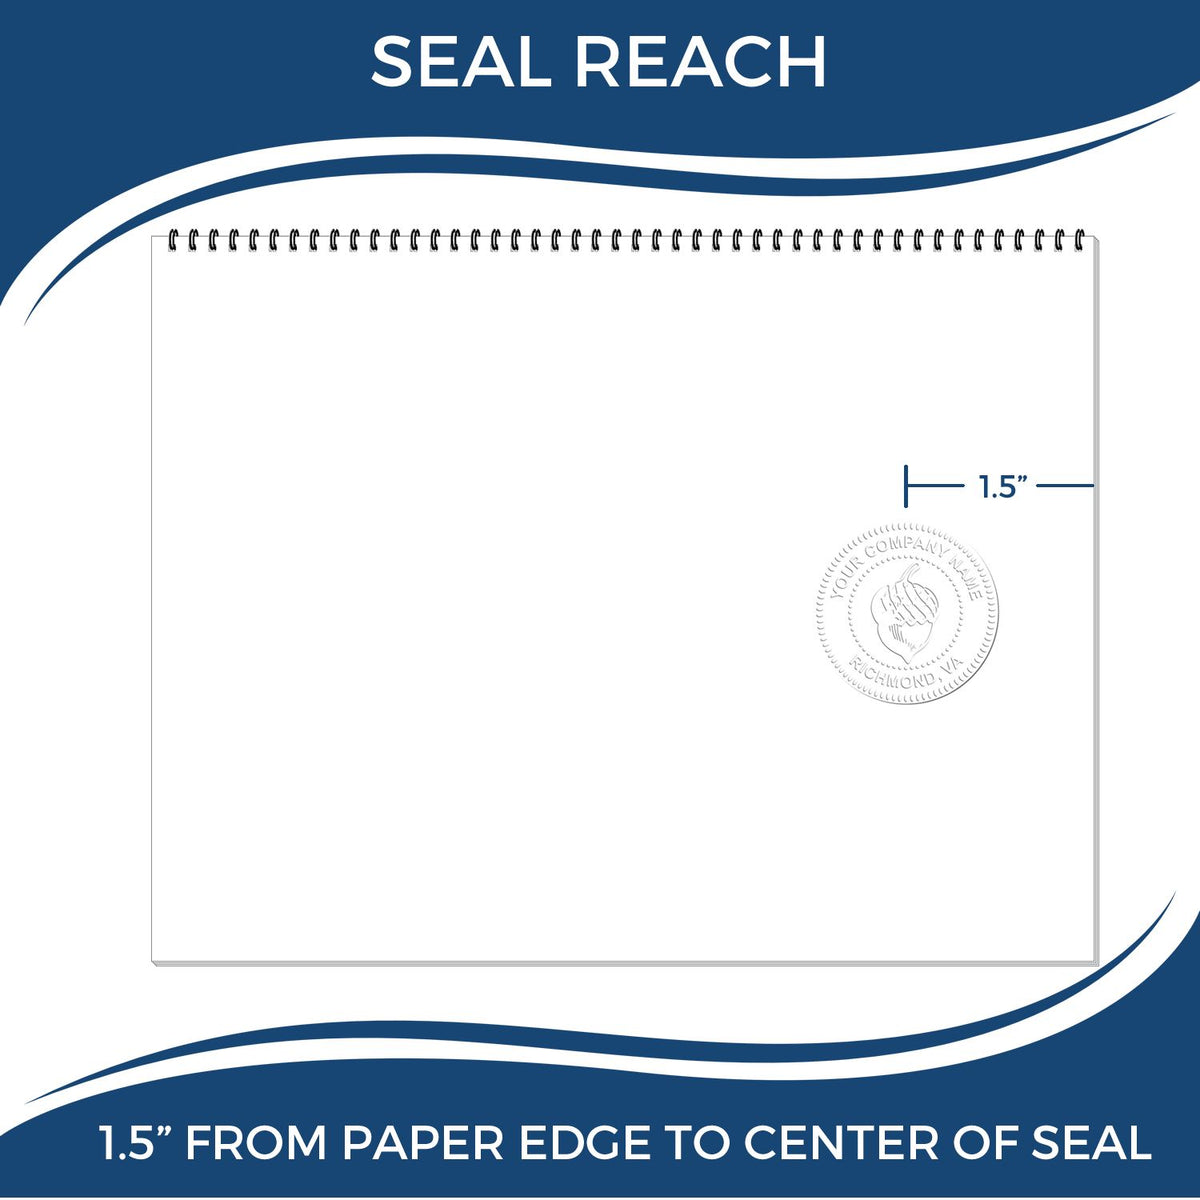 An infographic showing the seal reach which is represented by a ruler and a miniature seal image of the Soft Illinois Professional Geologist Seal